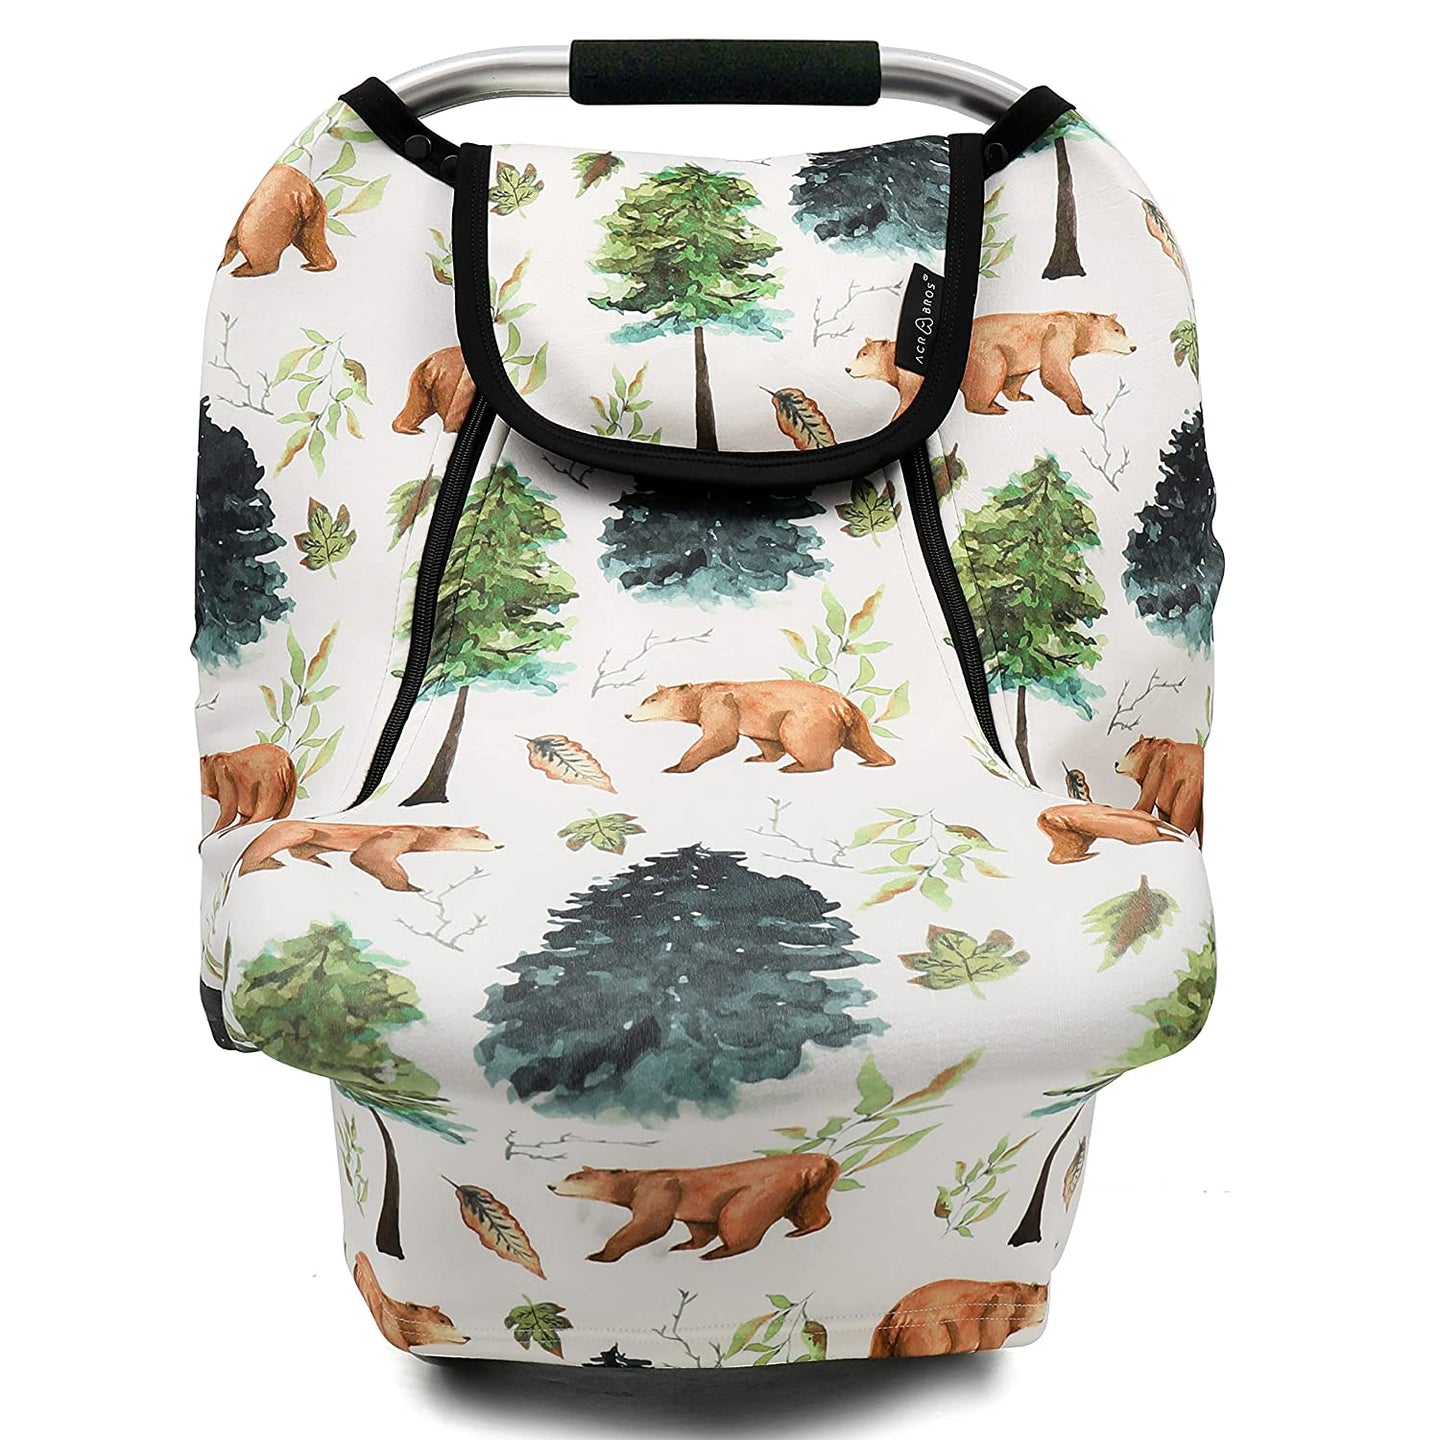 Stretchy Baby Car Seat Covers For All Seasons Bear& Forest